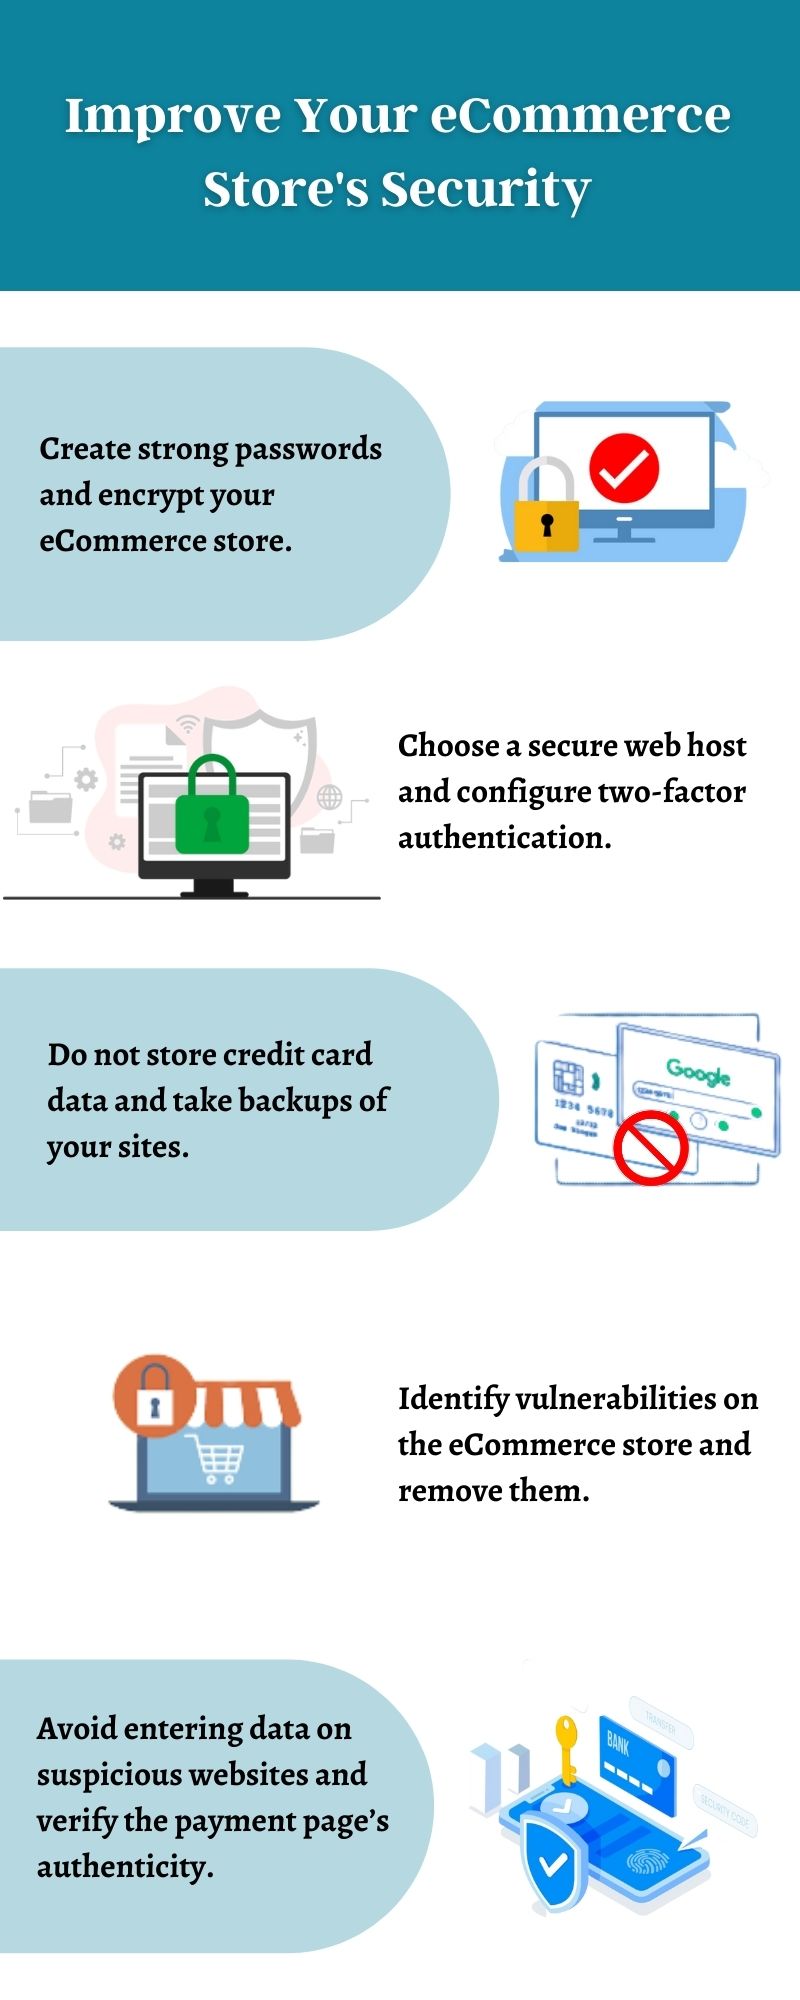 Improve Your eCommerce Store's Security